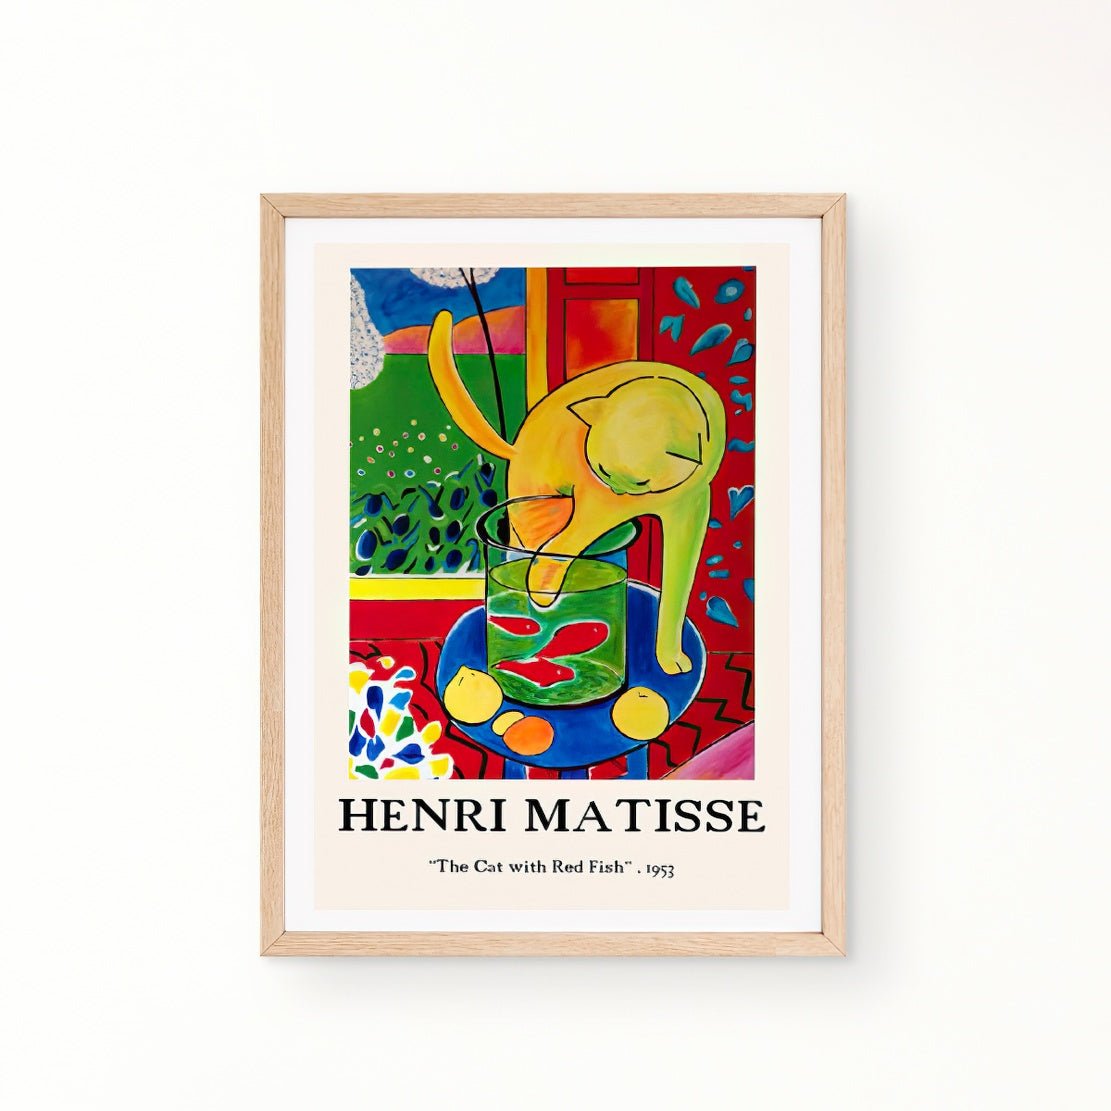 Henri Matisse "The Cat with Red Fish" 1954 art print poster